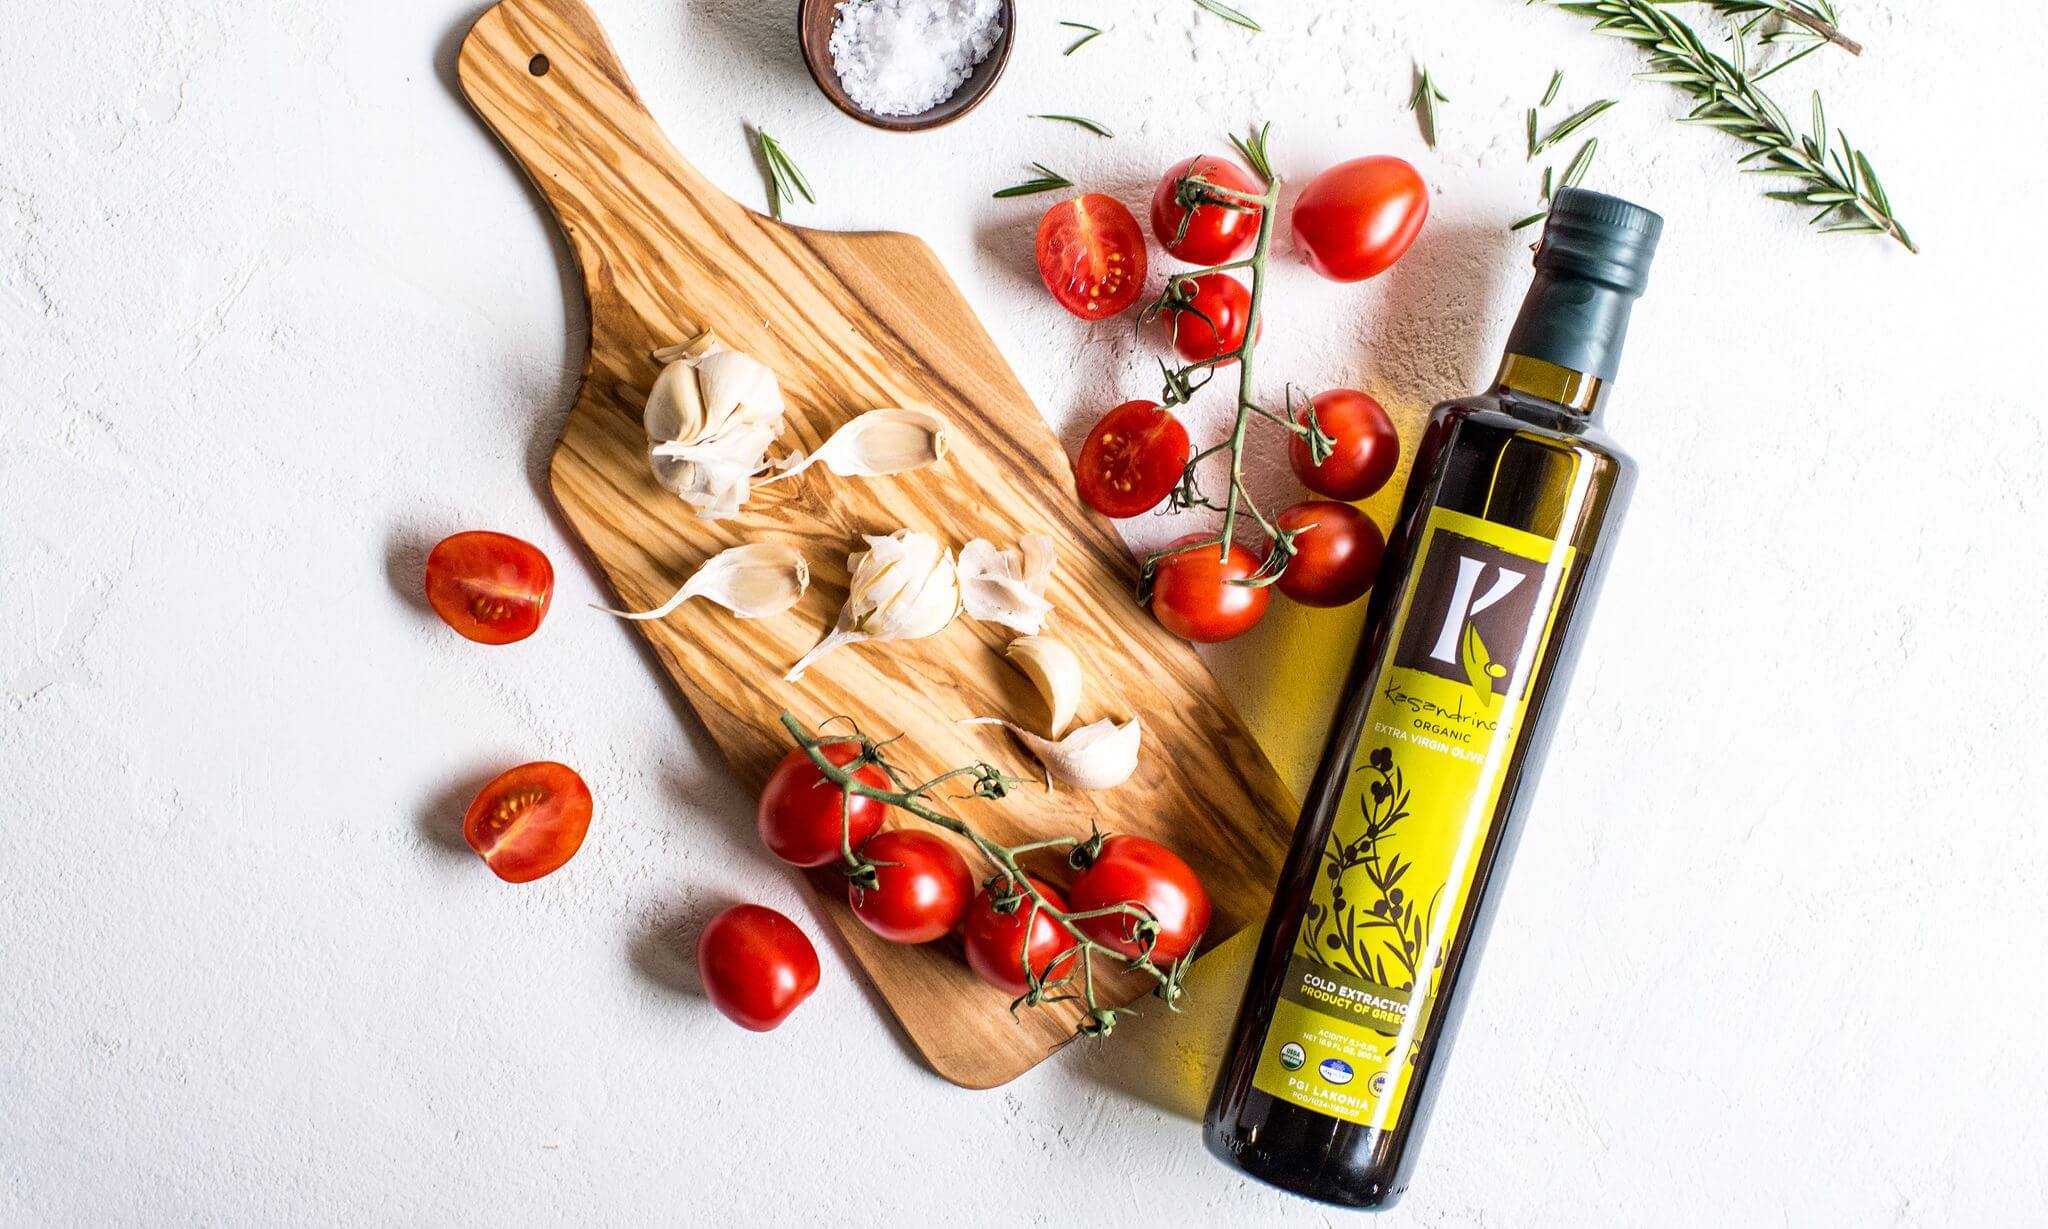 Kasandrinos olive oil controversy video